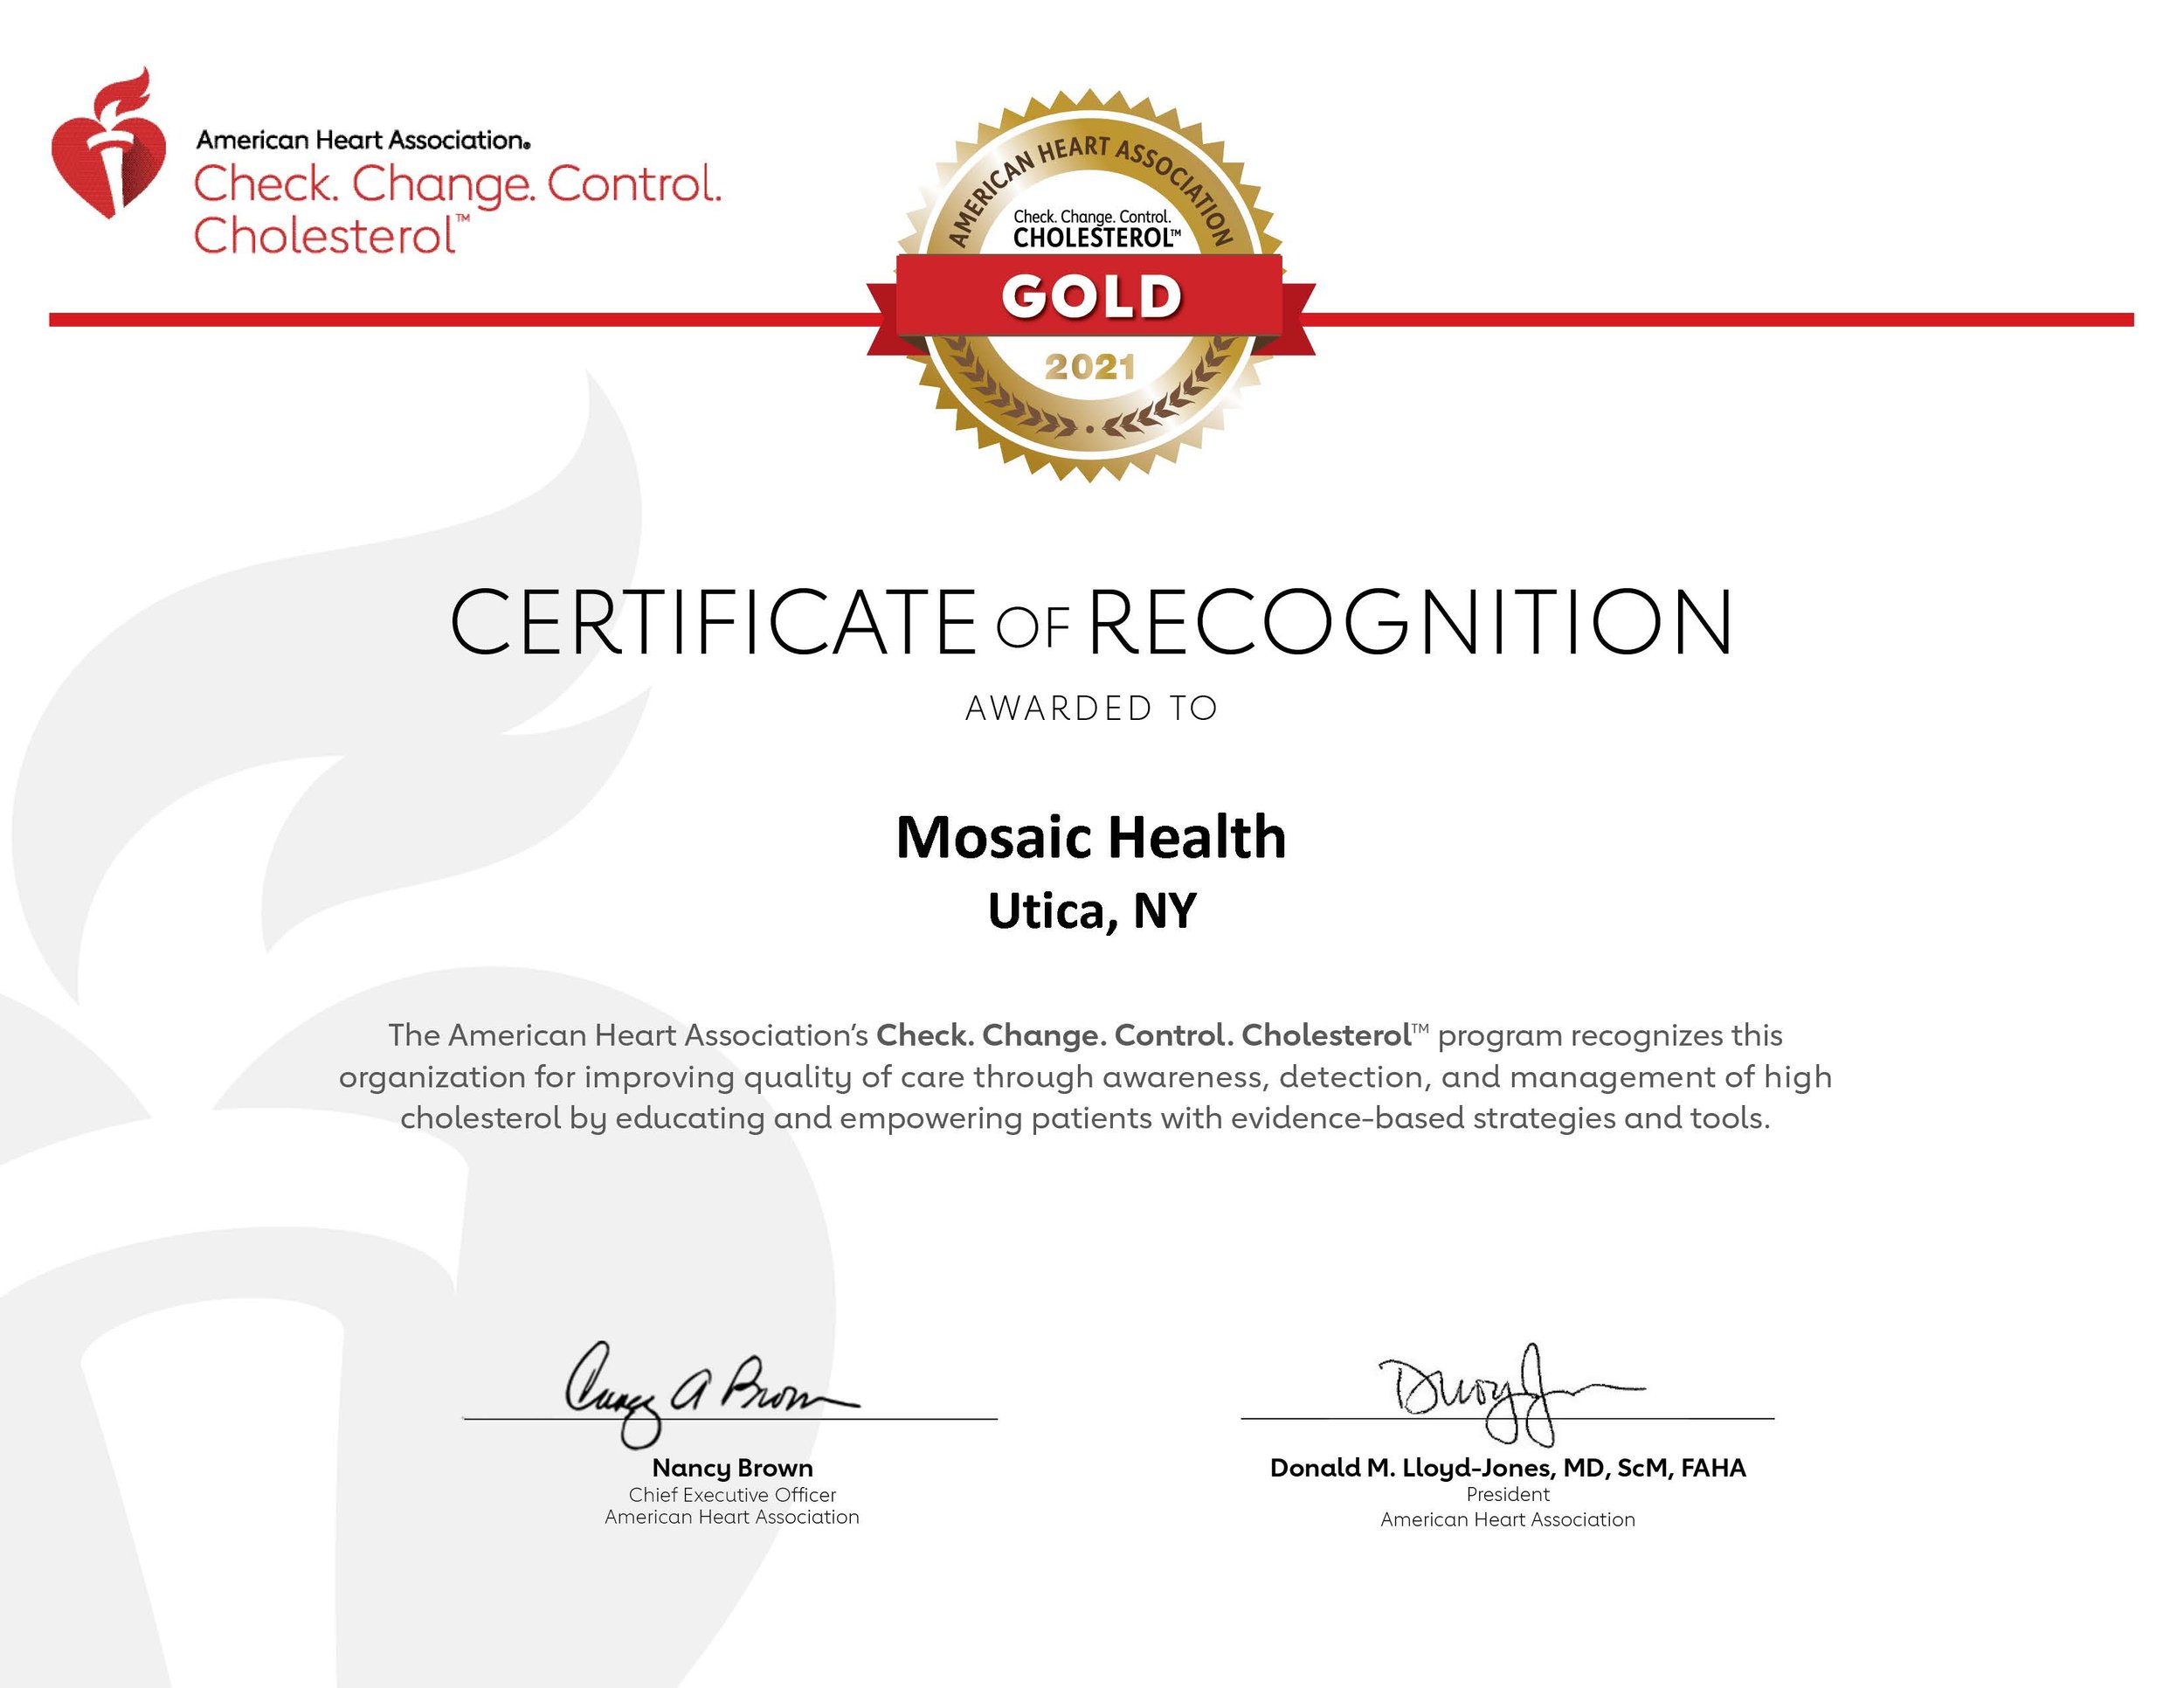 CCCC_CERTIFICATE_GOLD 2021 - Mosaic Health - NY.jpg